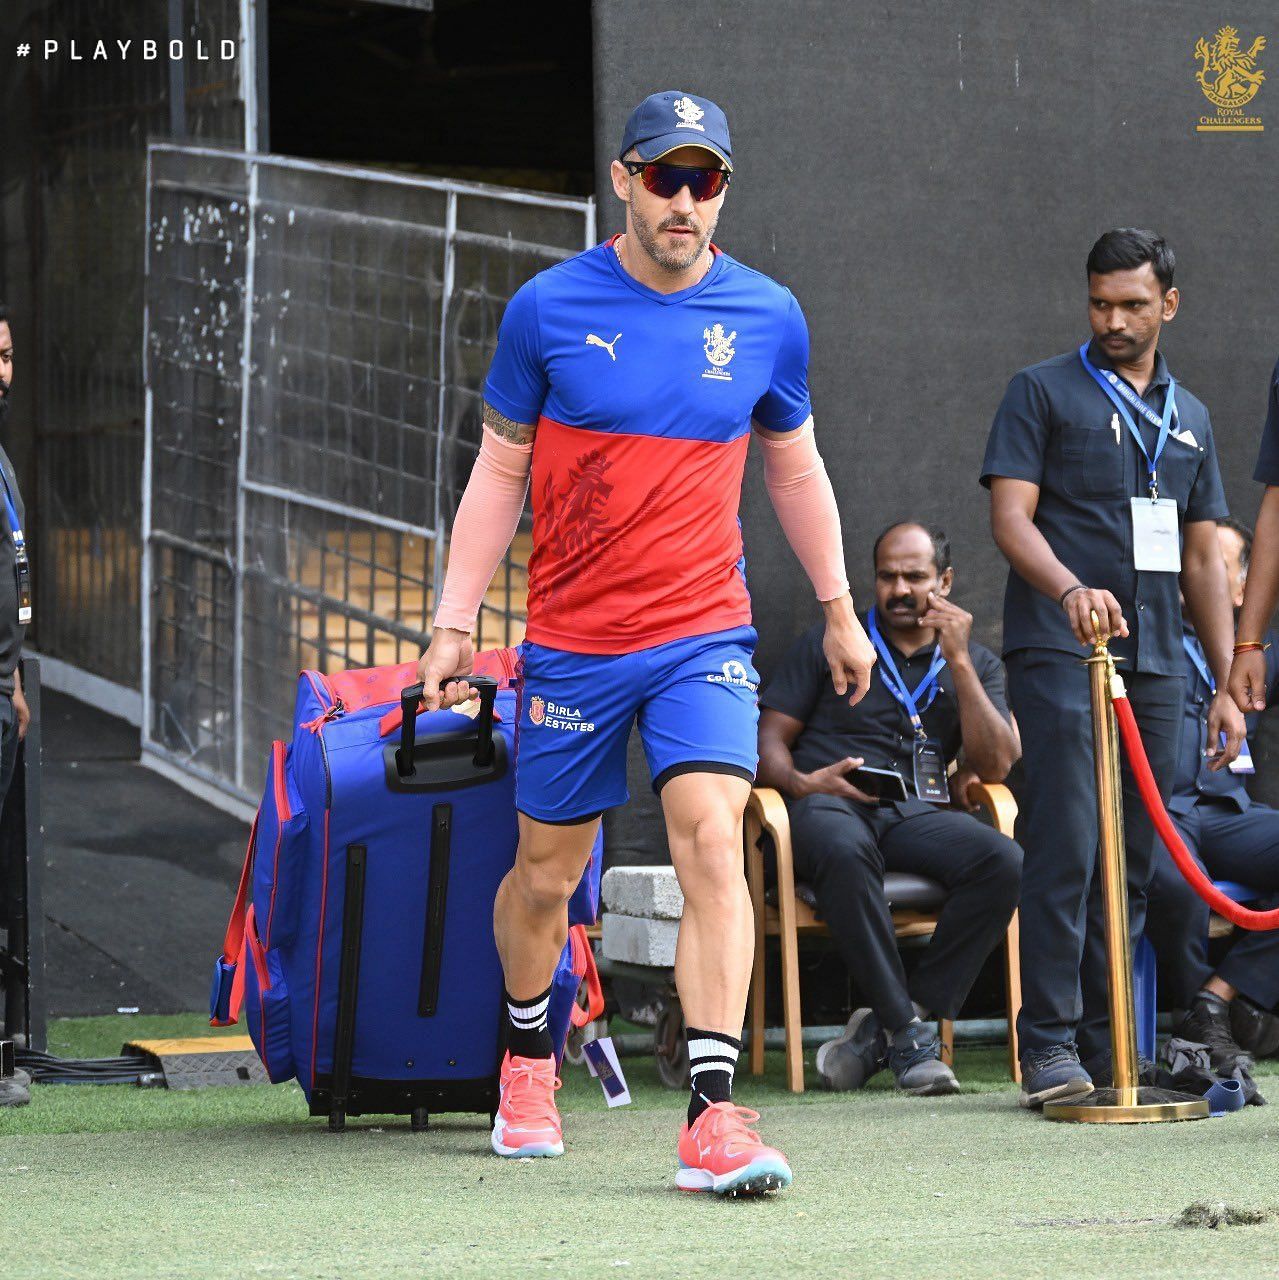 Faf du Plessis heads for a practice session. (Credits: Twitter)